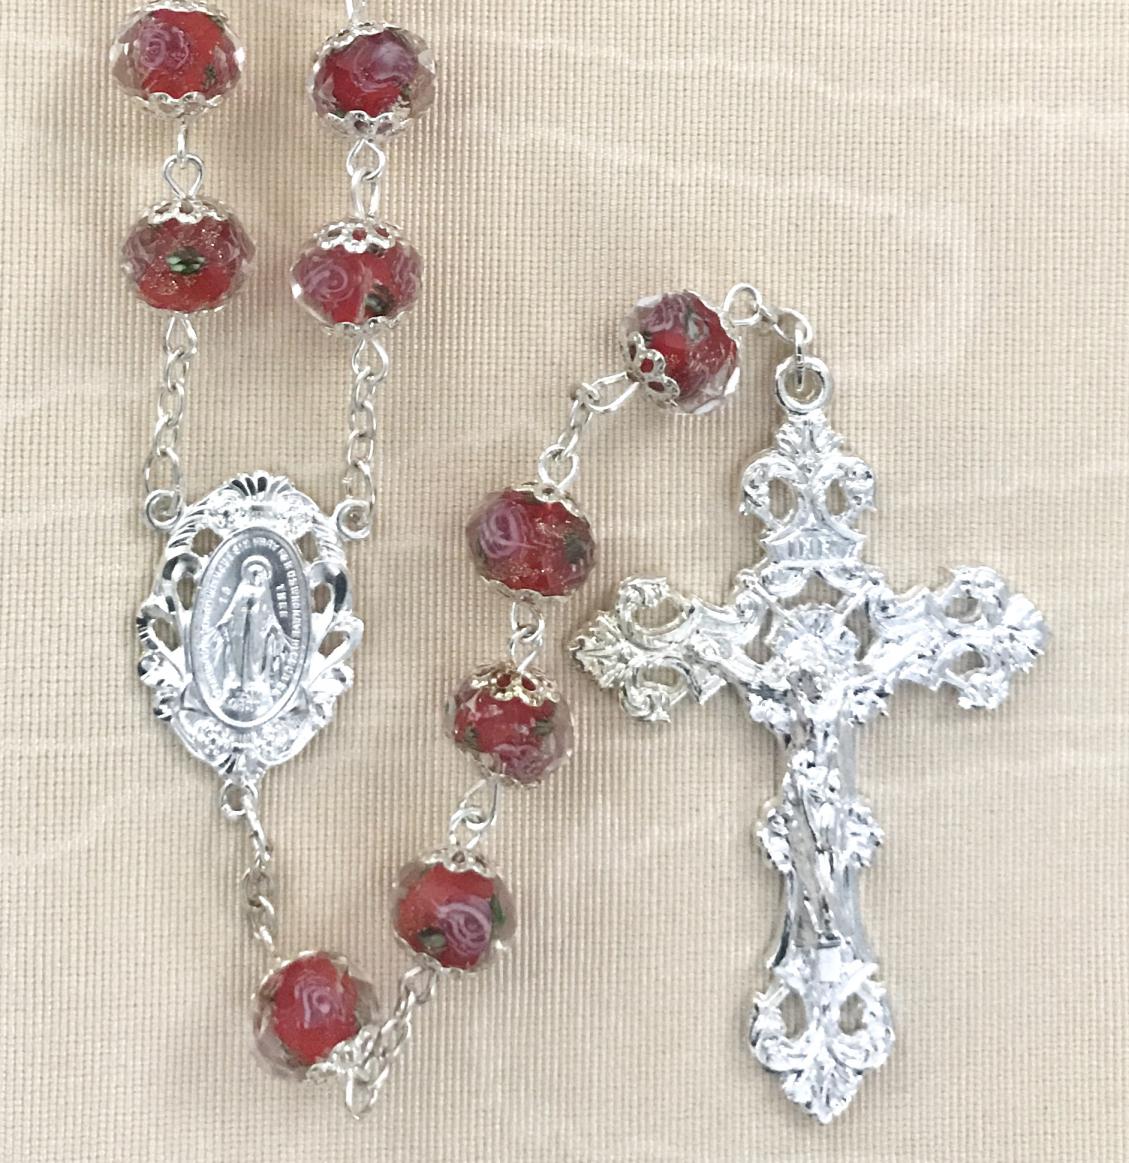 10x8MM RUBY HAND PAINTED ROSE ROSARY WITH STERLING SILVER PLATED CRUCIFIX AND CENTER GIFT BOXED